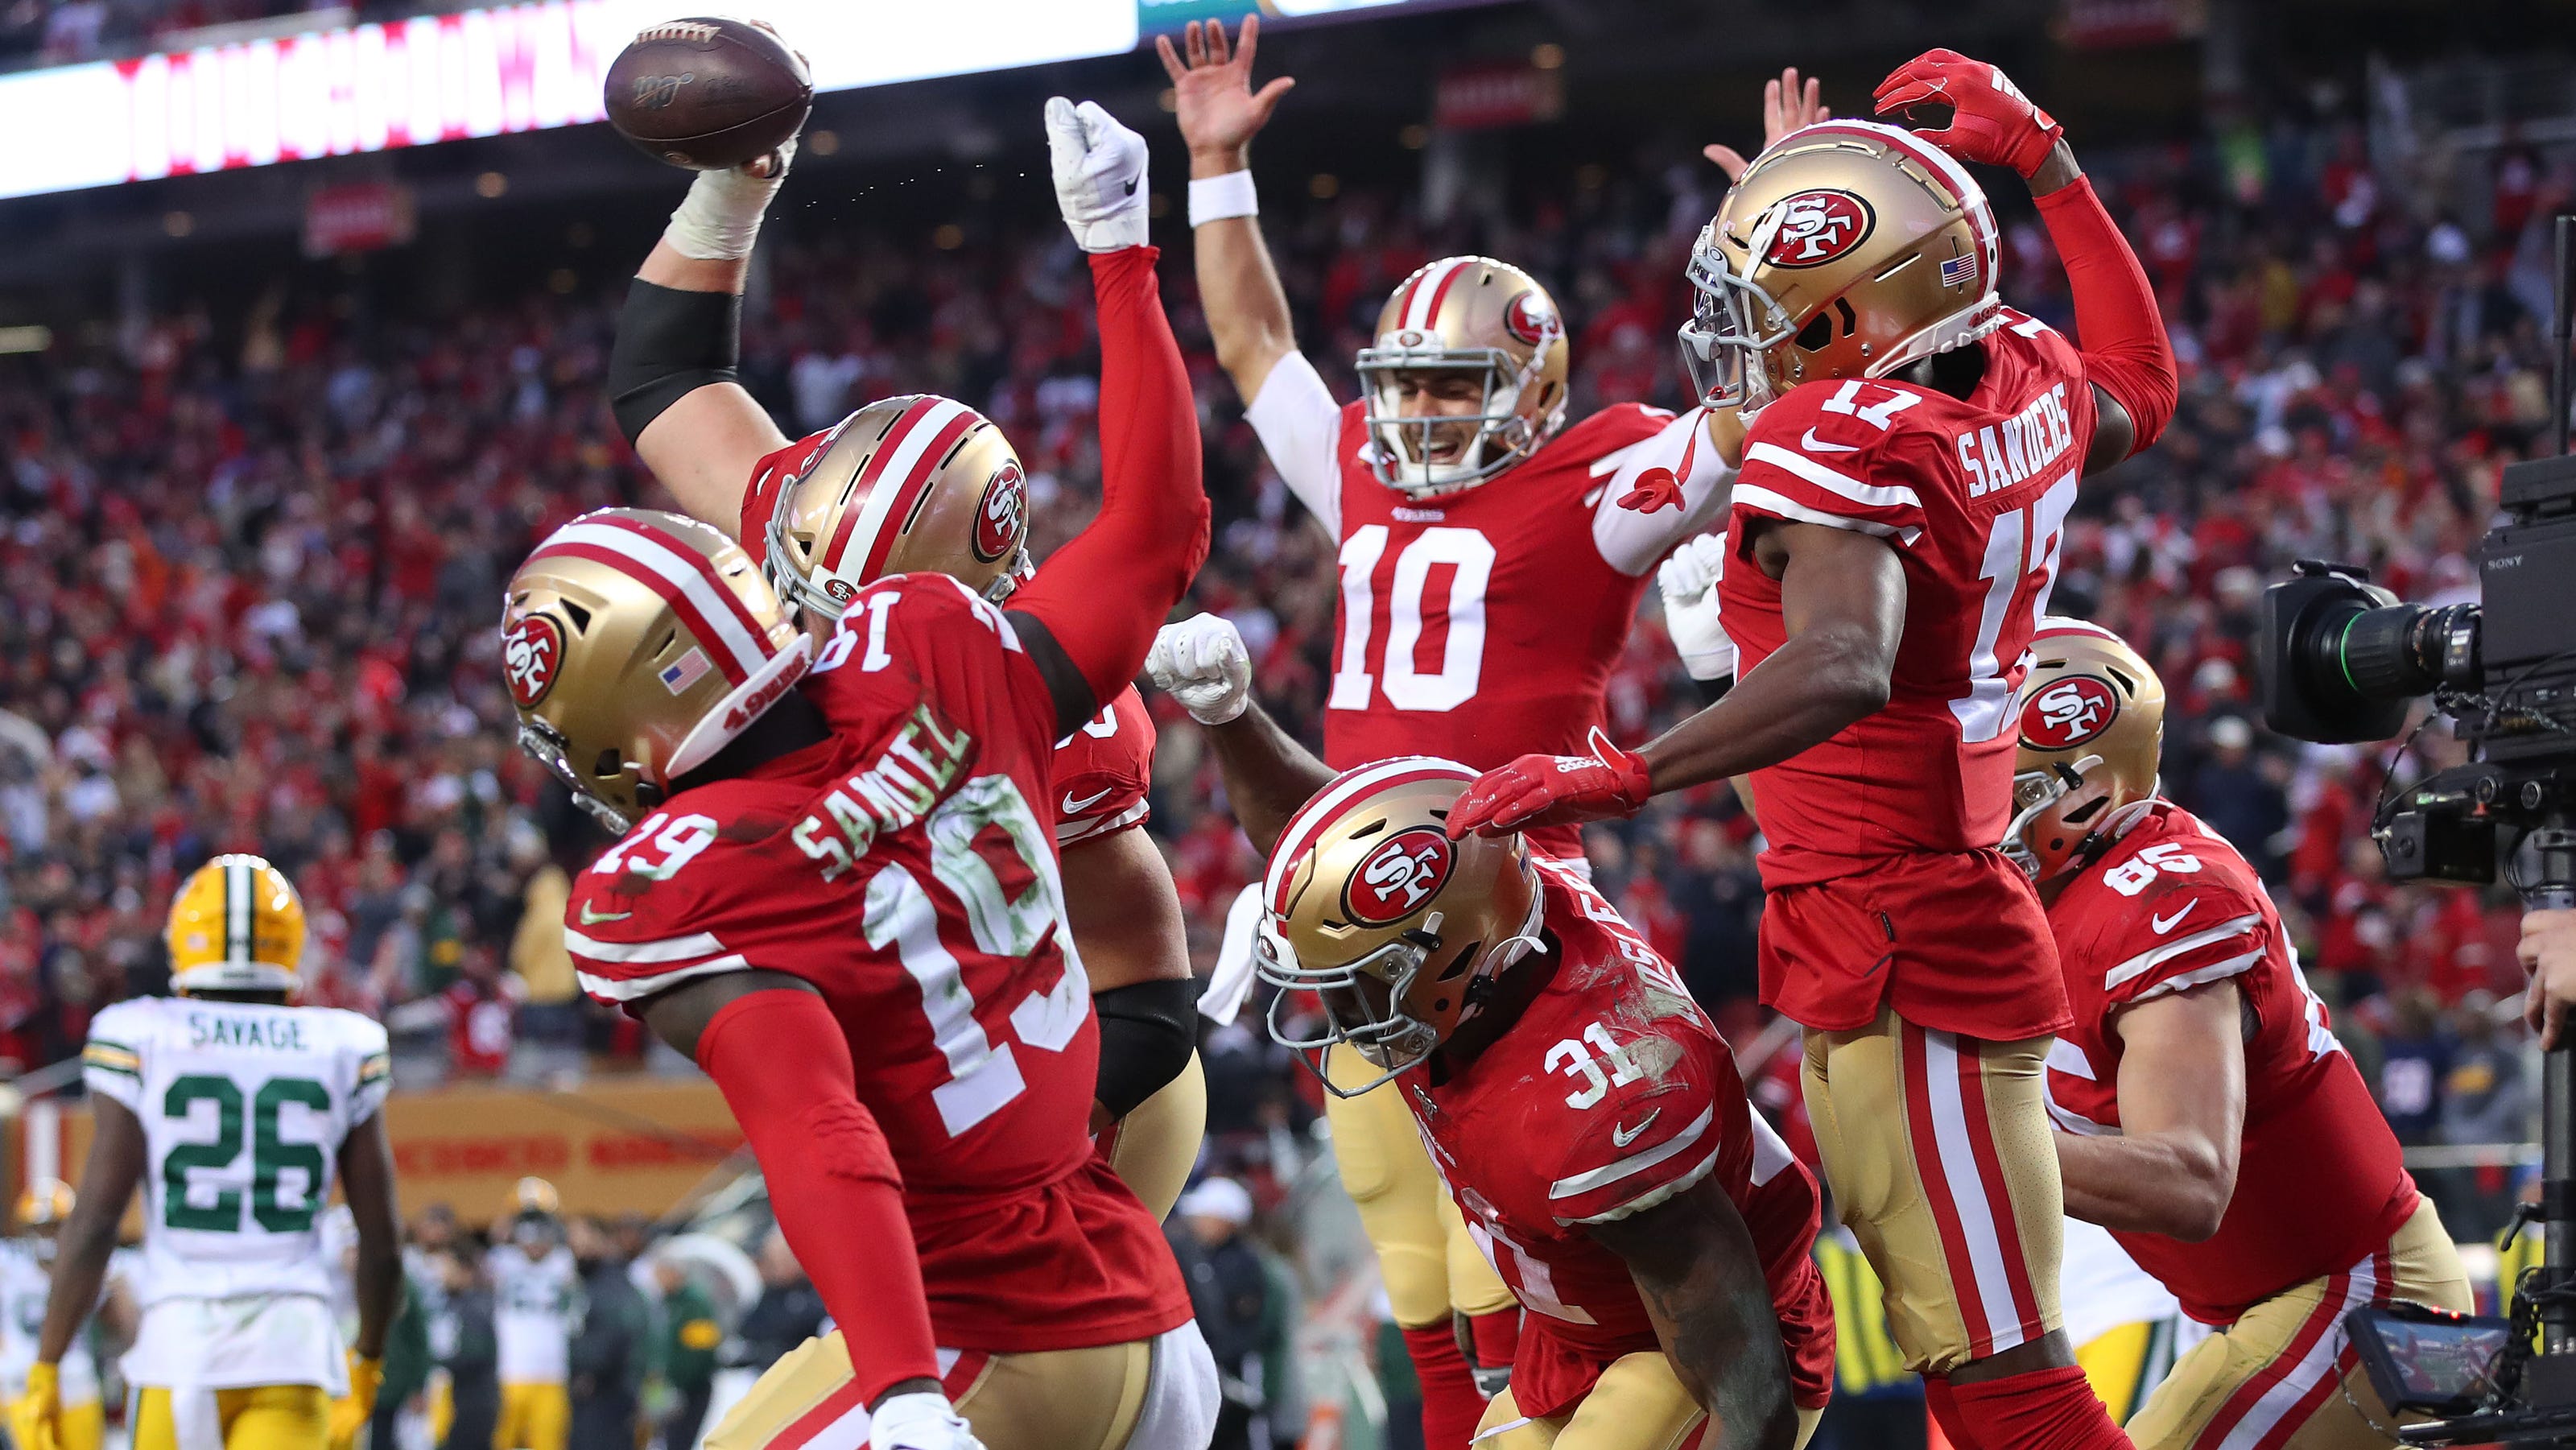 49ers smash Packers in NFC championship game to reach Super Bowl LIV